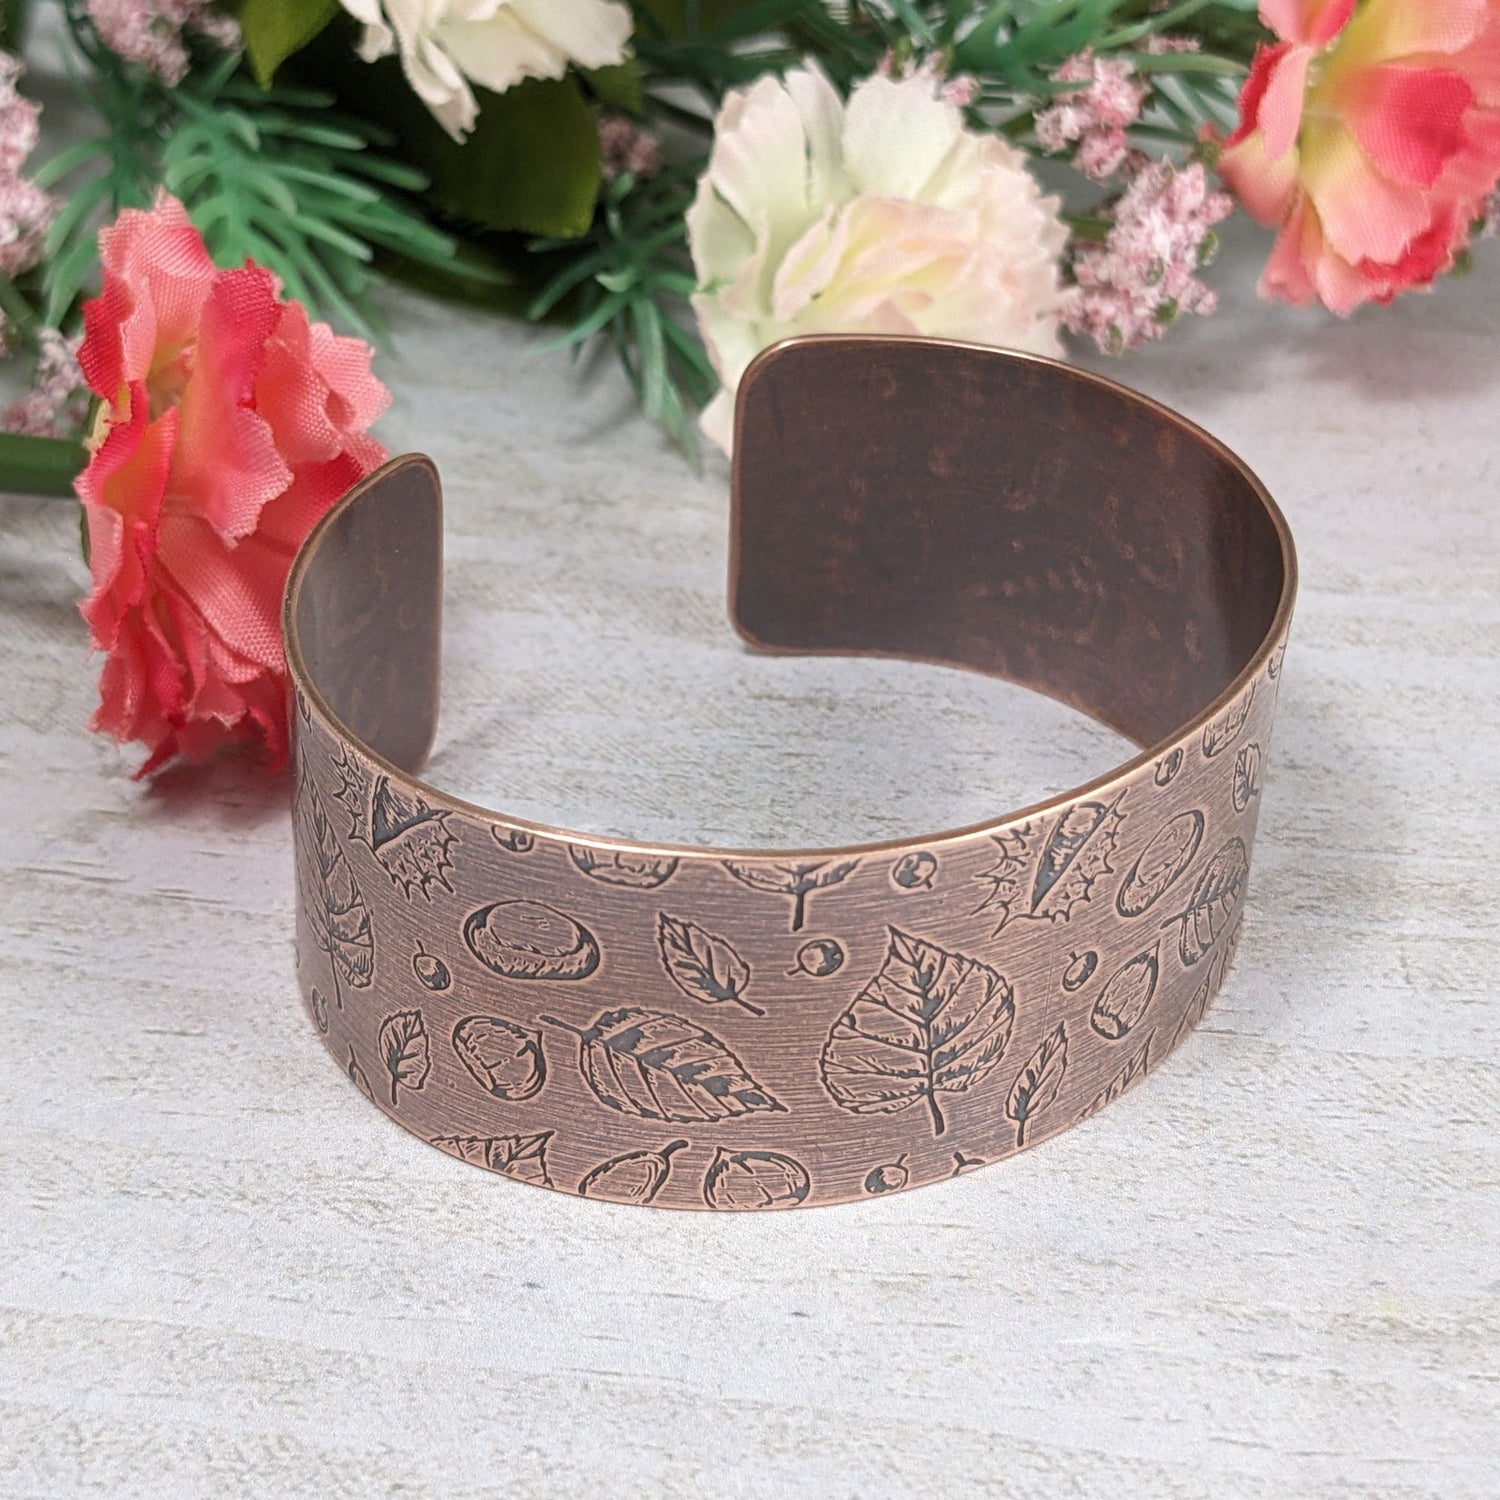 A copper cuff bracelet covered in a pattern of fall leaves and nuts